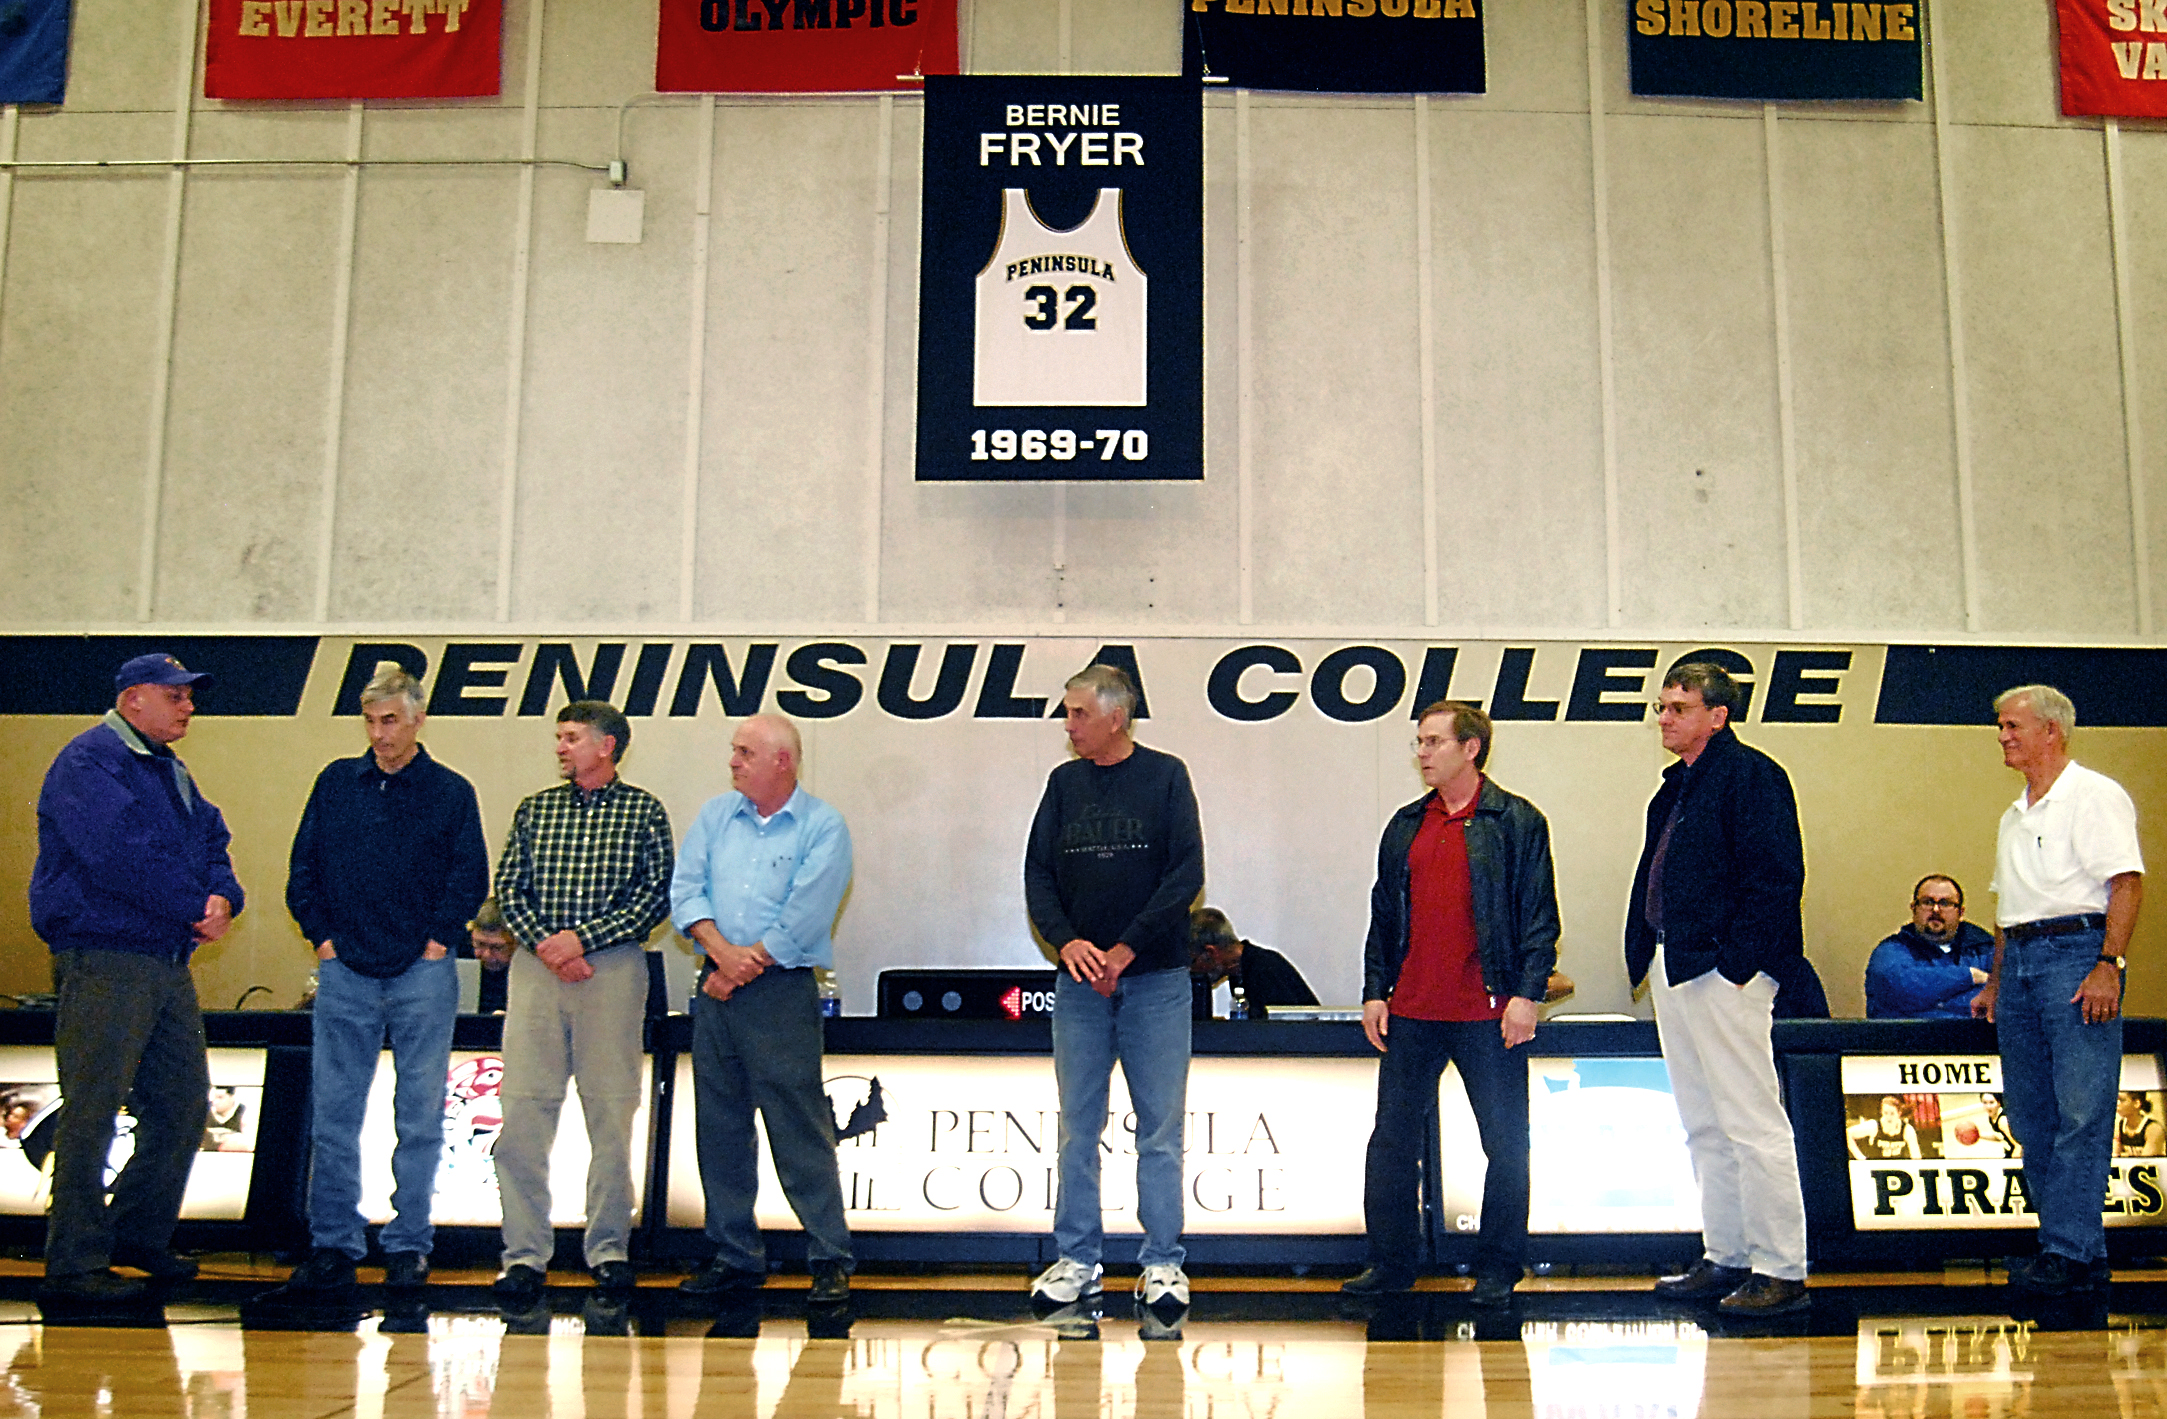 A retired jersey for Bernie Fryer hangs from the ceiling of the Peninsula College gym as members of the 1970 championship team are honored. Pictured are